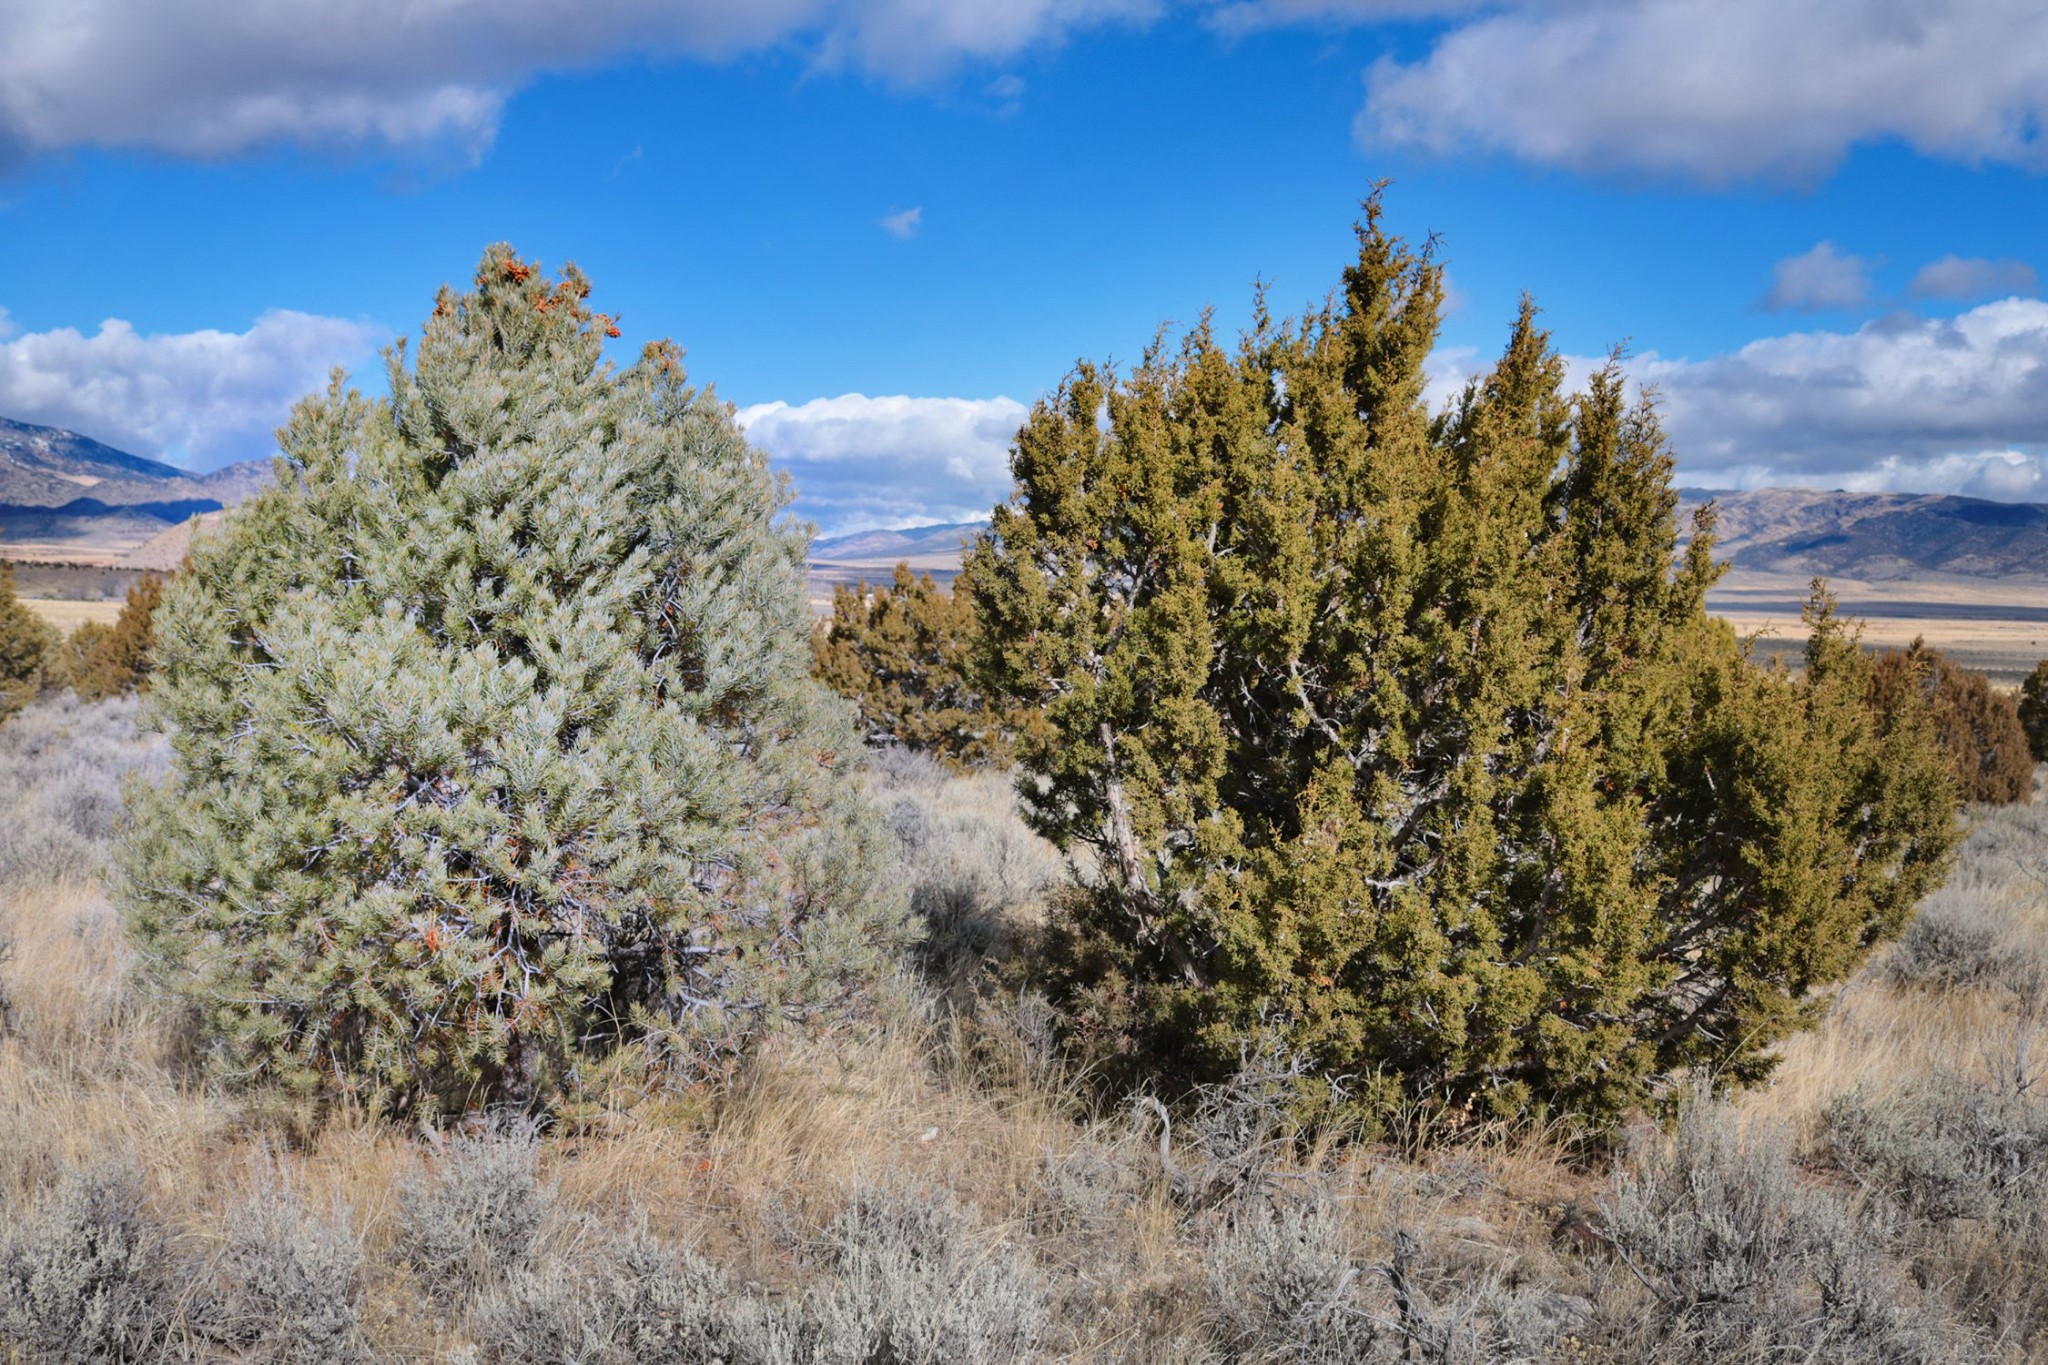 A Pine and a Juniper of similar size and shape grow side by side.